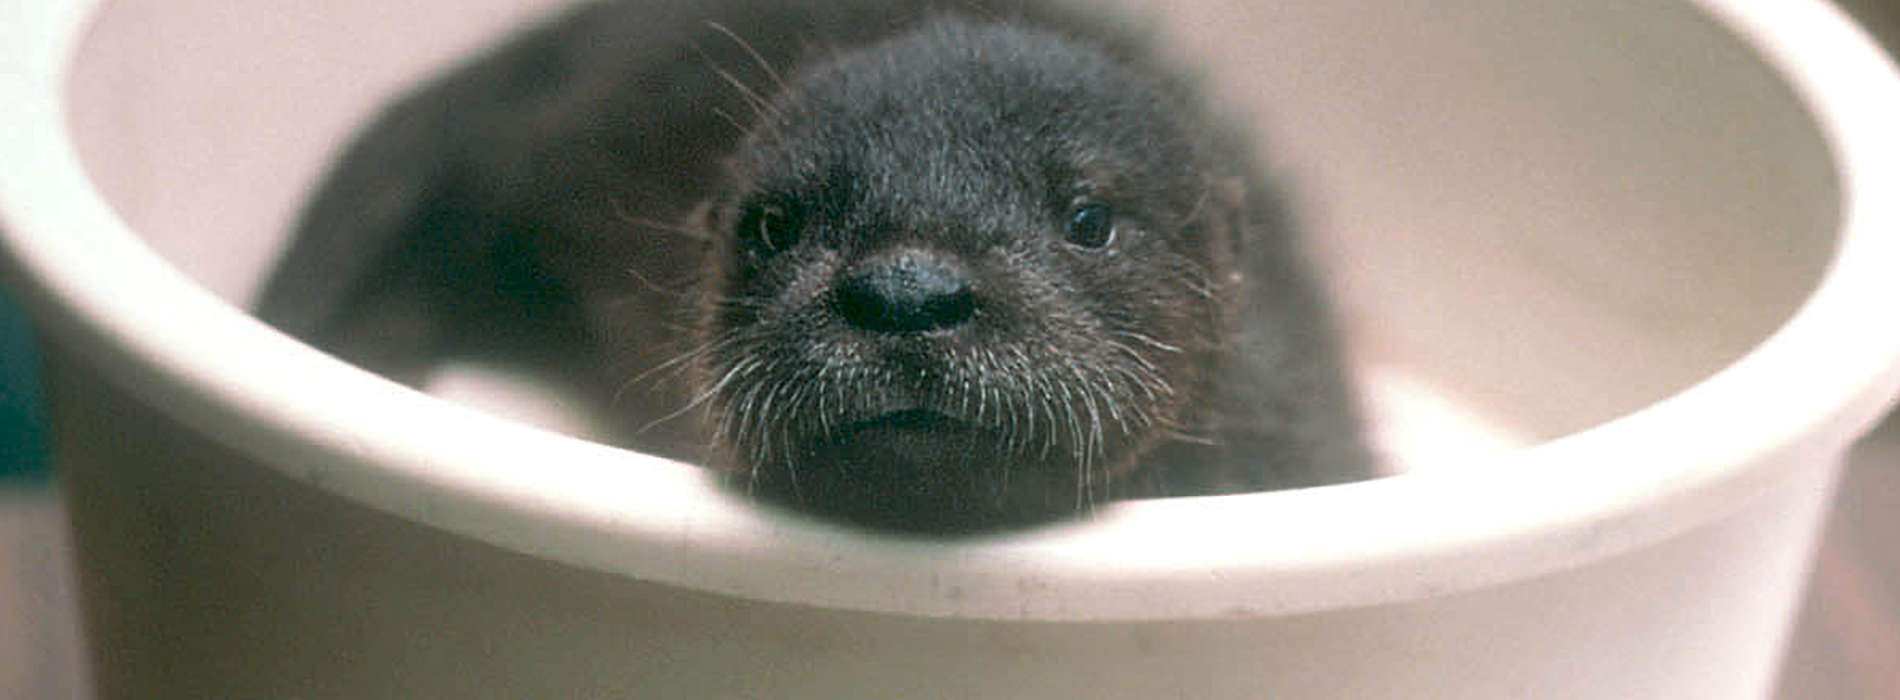 Baby otter resting in his water dish